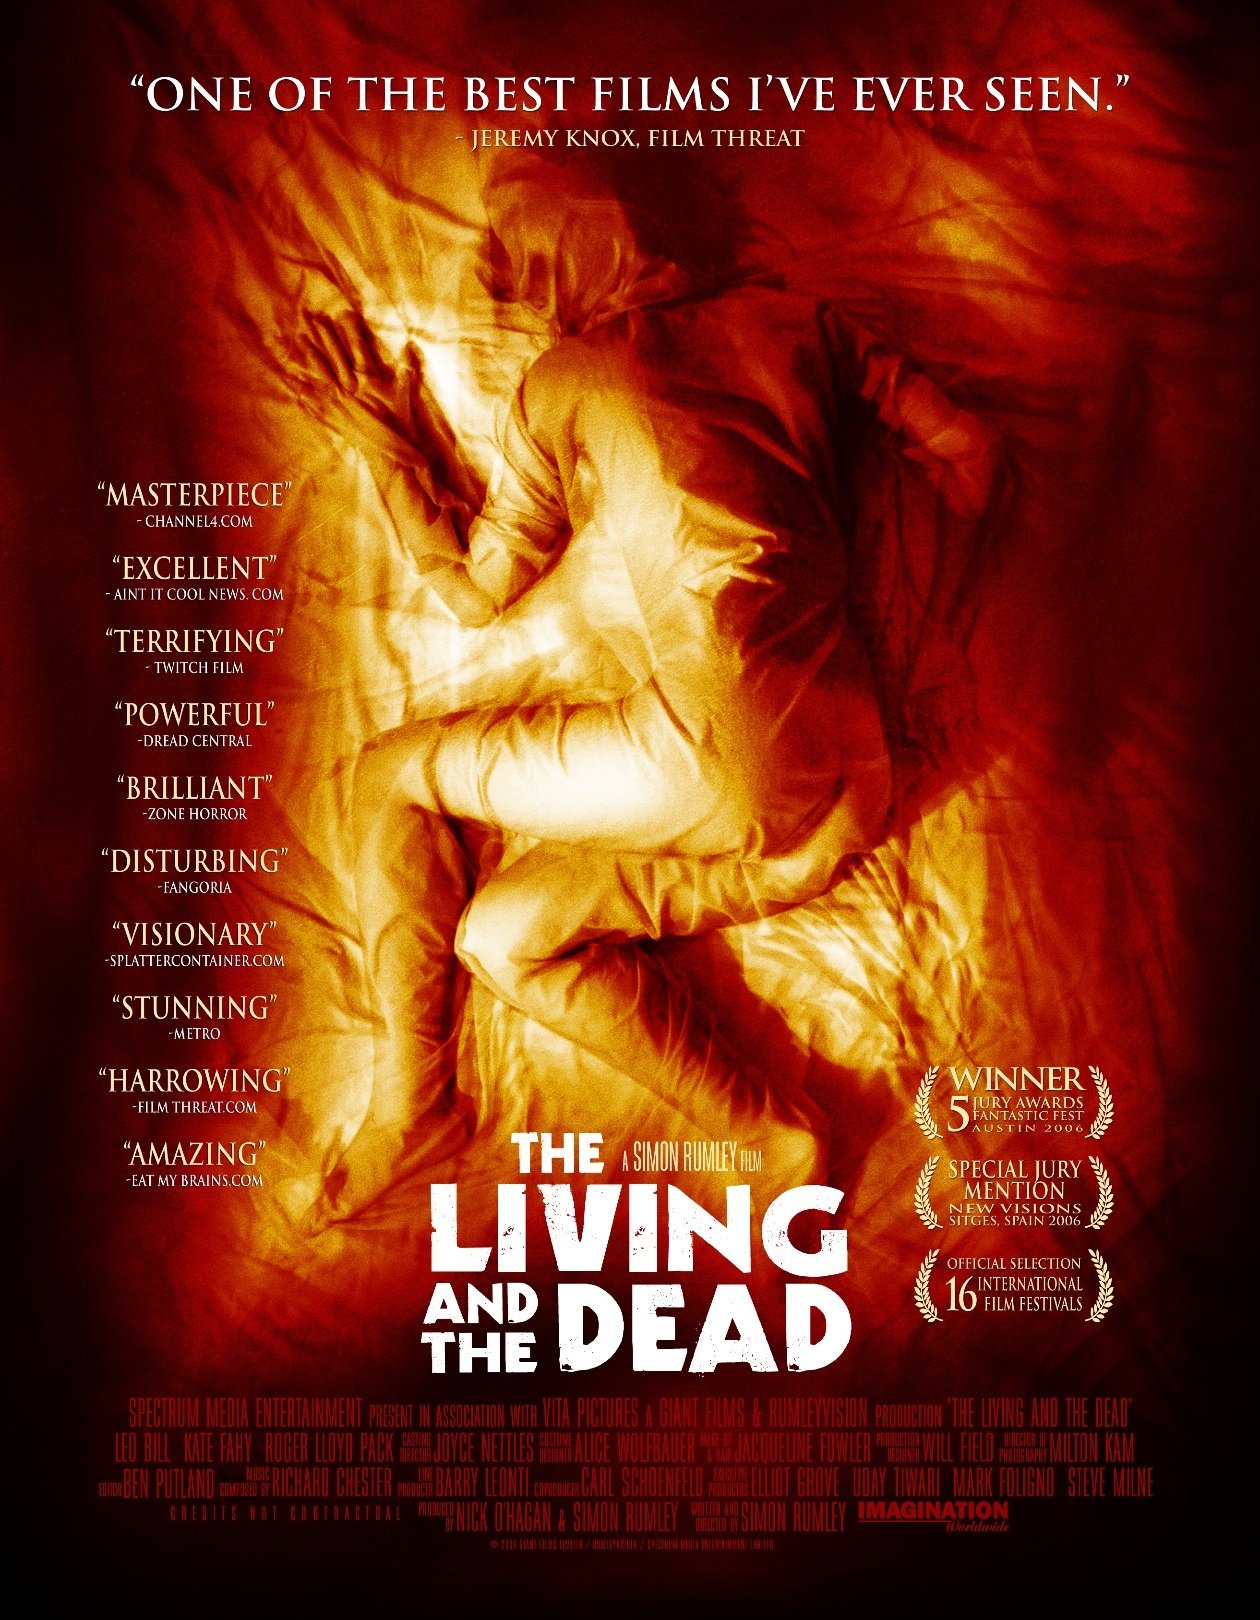 The Living and the Dead (2006) Screenshot 1